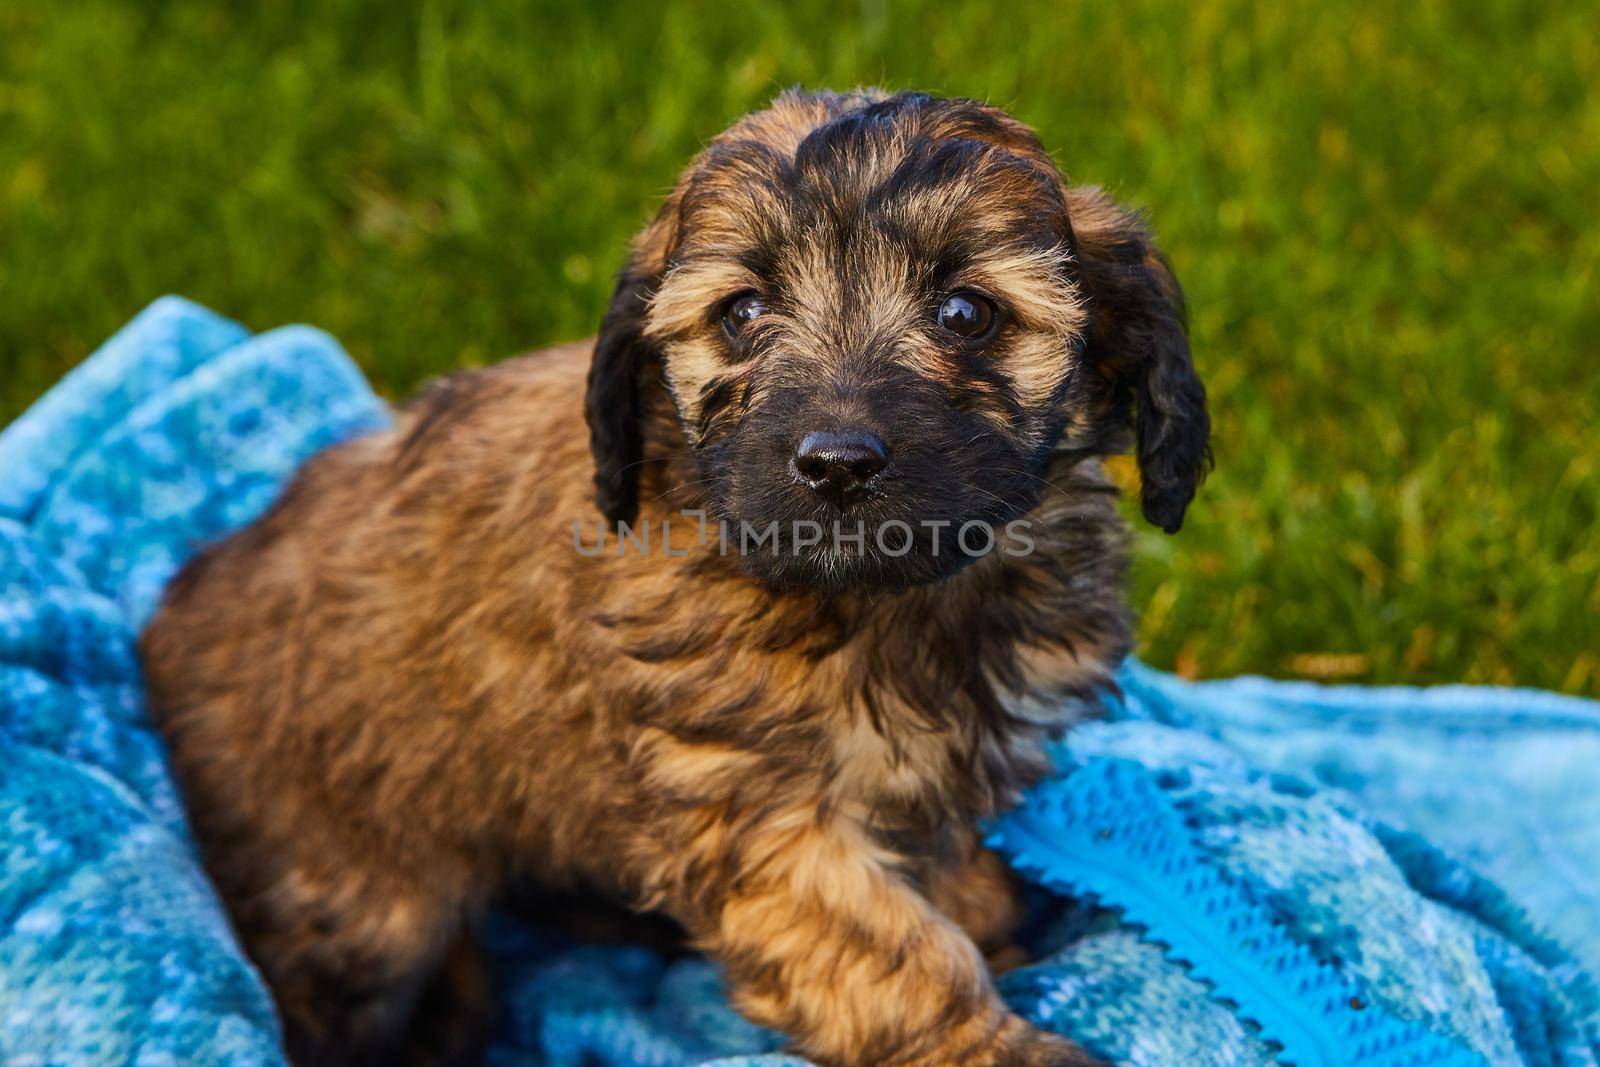 Image of Black and brown spotted goldendoodle puppy in blue blanket by grass